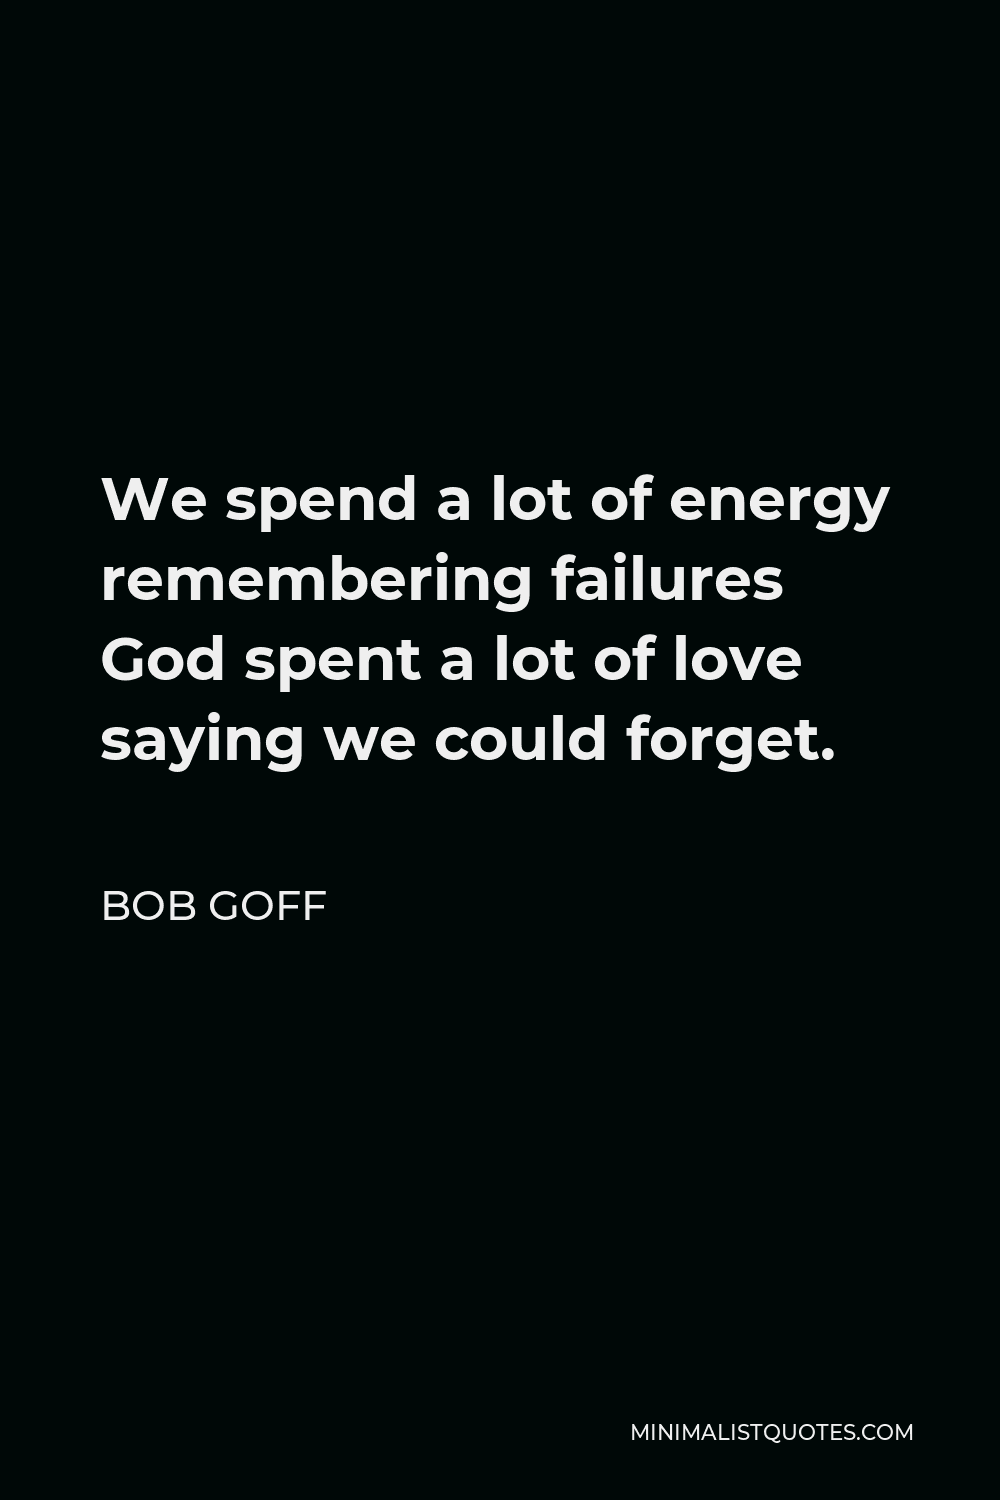 Bob Goff Quote - We spend a lot of energy remembering failures God spent a lot of love saying we could forget.